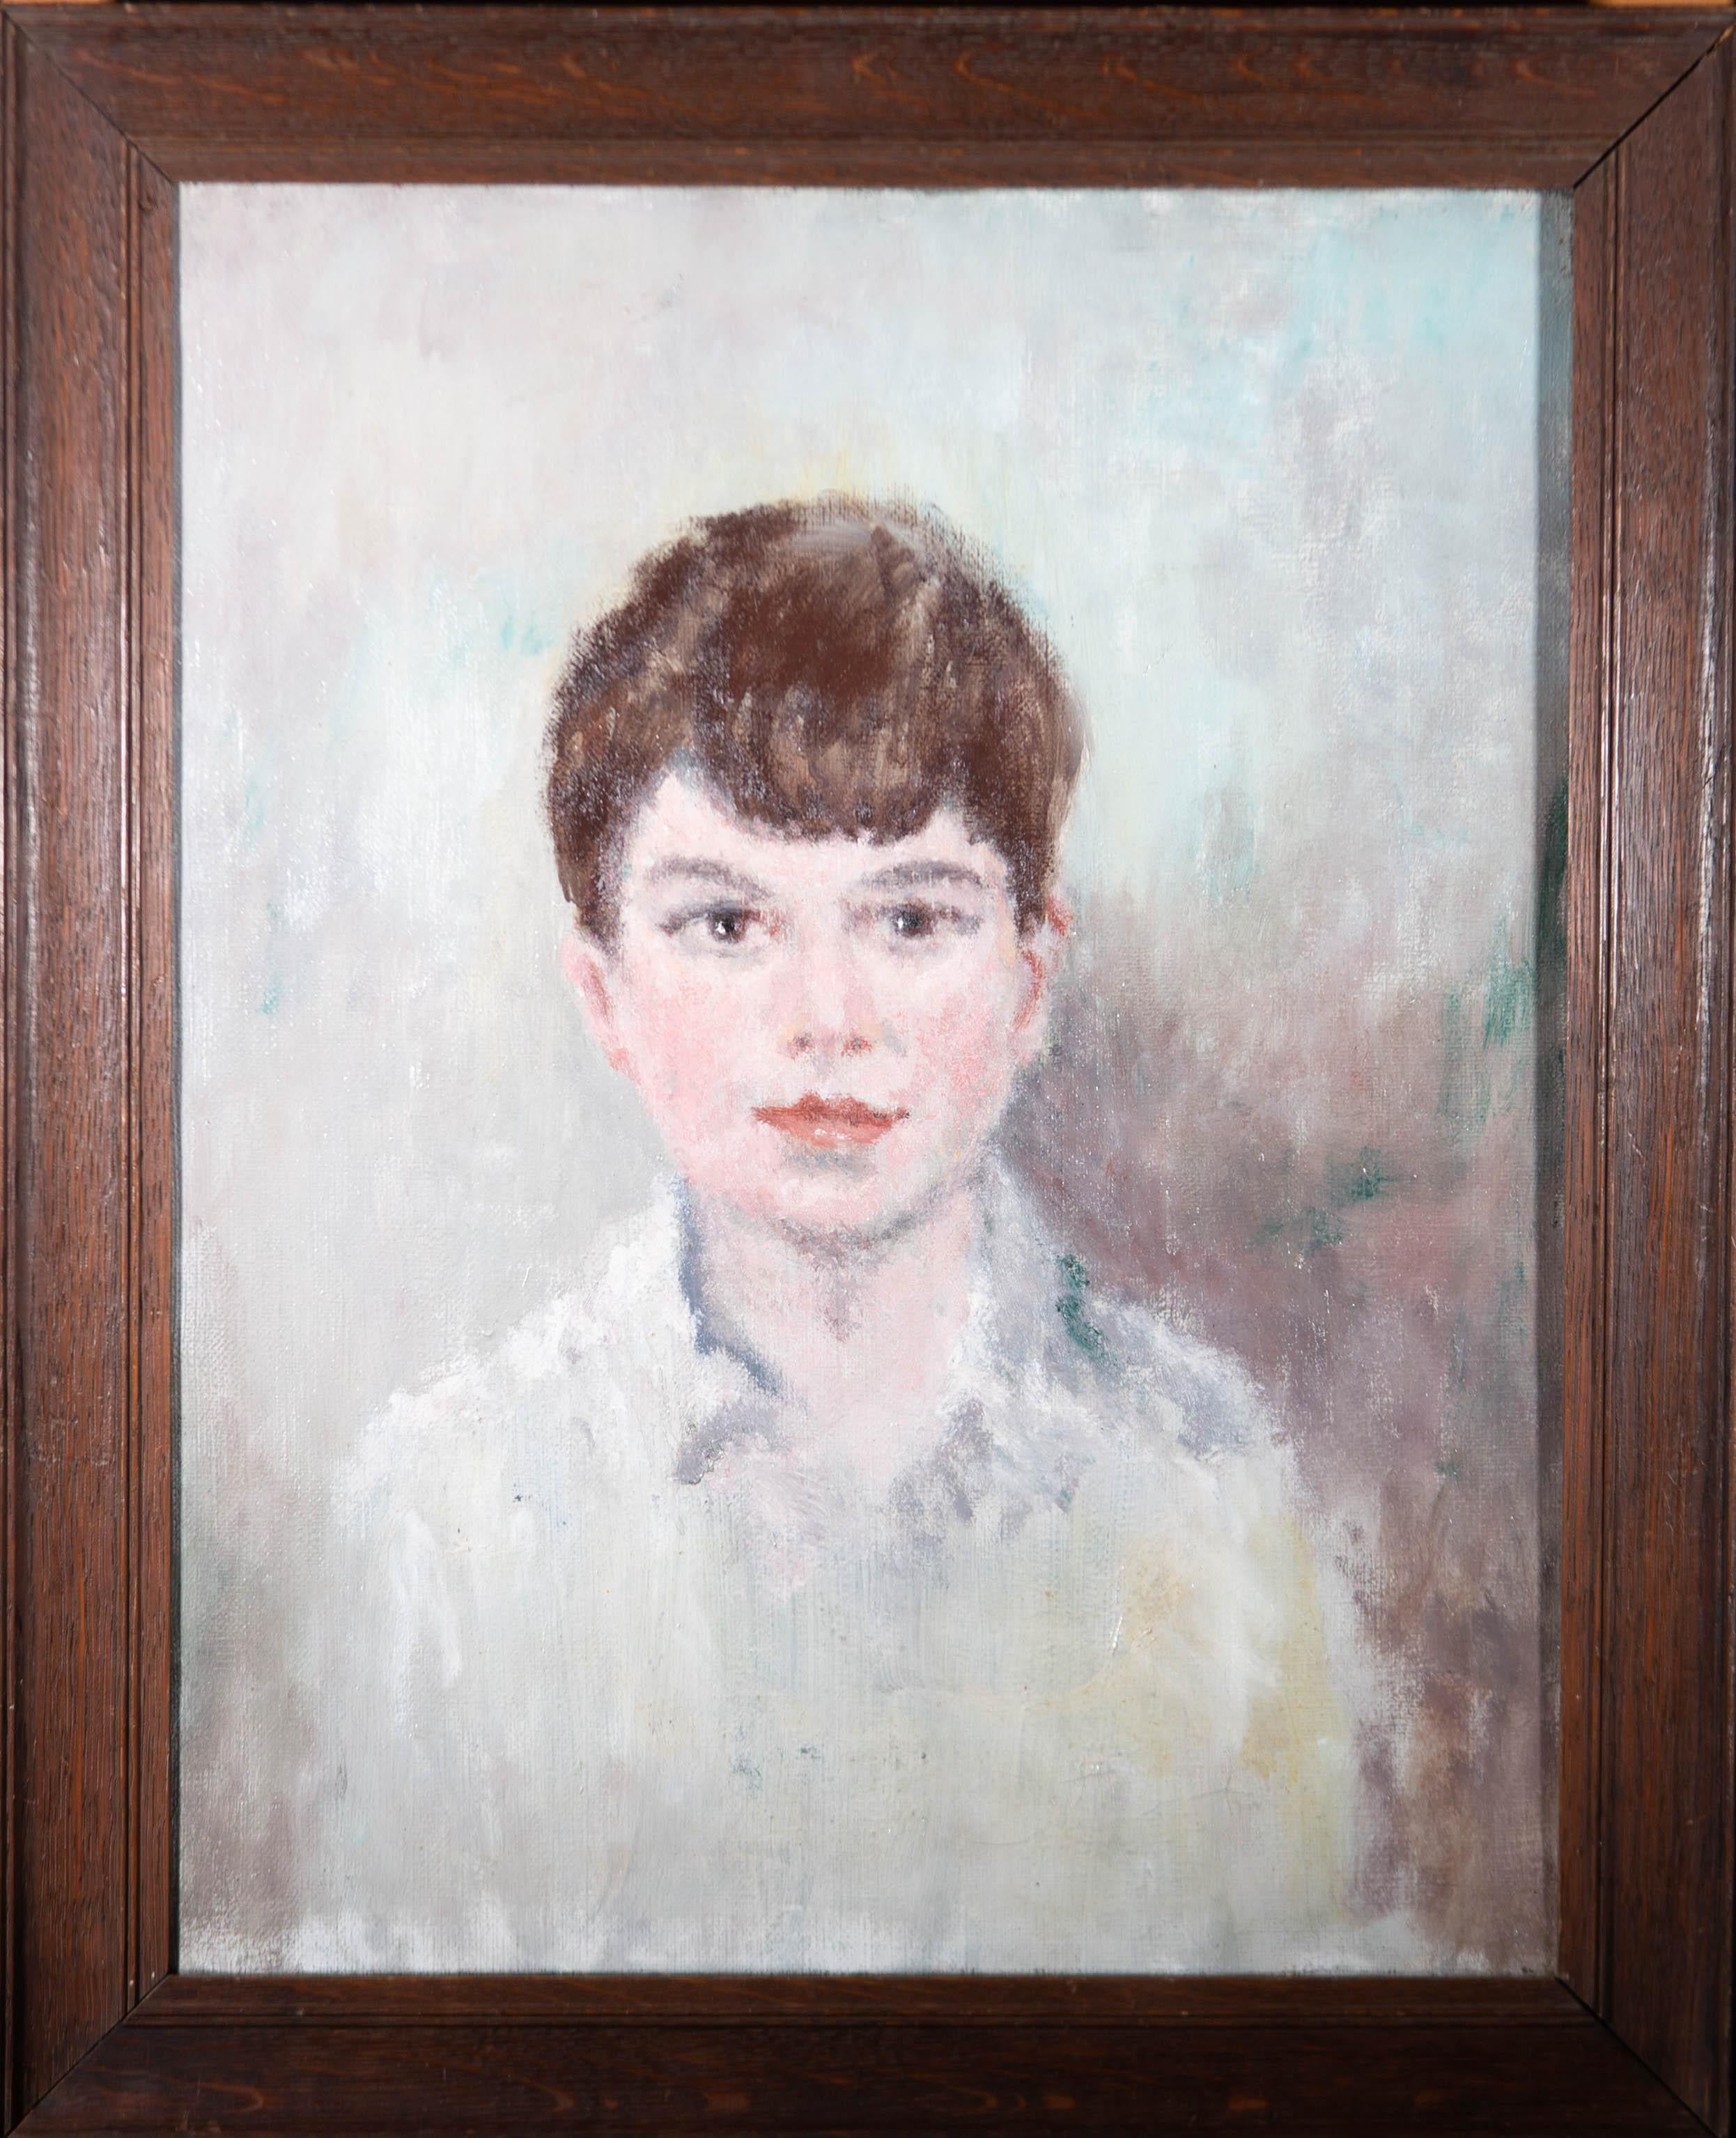 Unknown Portrait Painting - 20th Century Oil - Boy in White Shirt